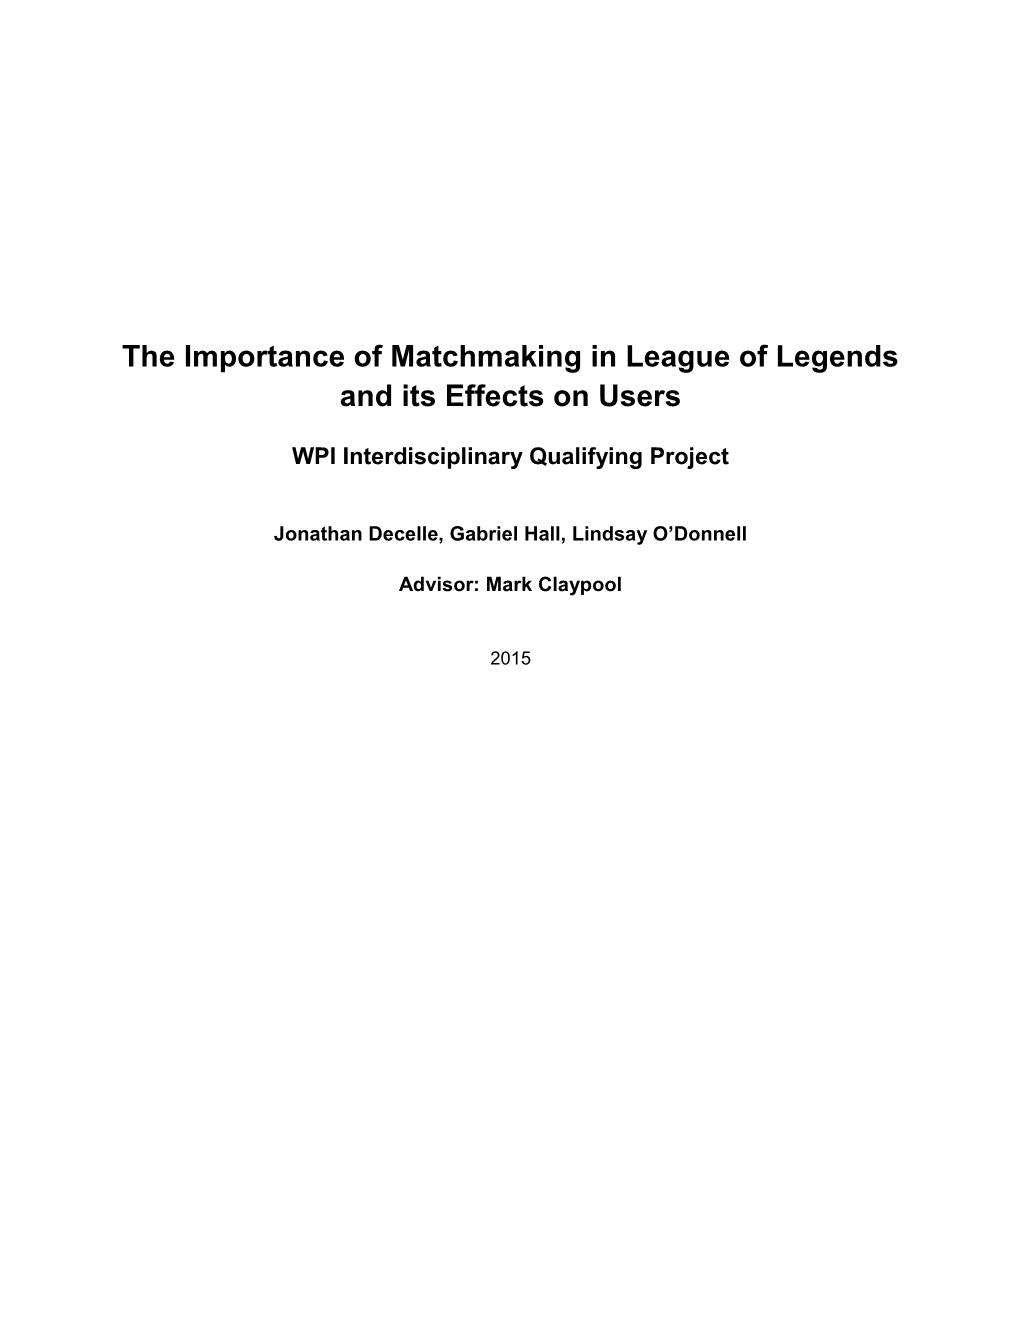 The Importance of Matchmaking in League of Legends and Its Effects on Users